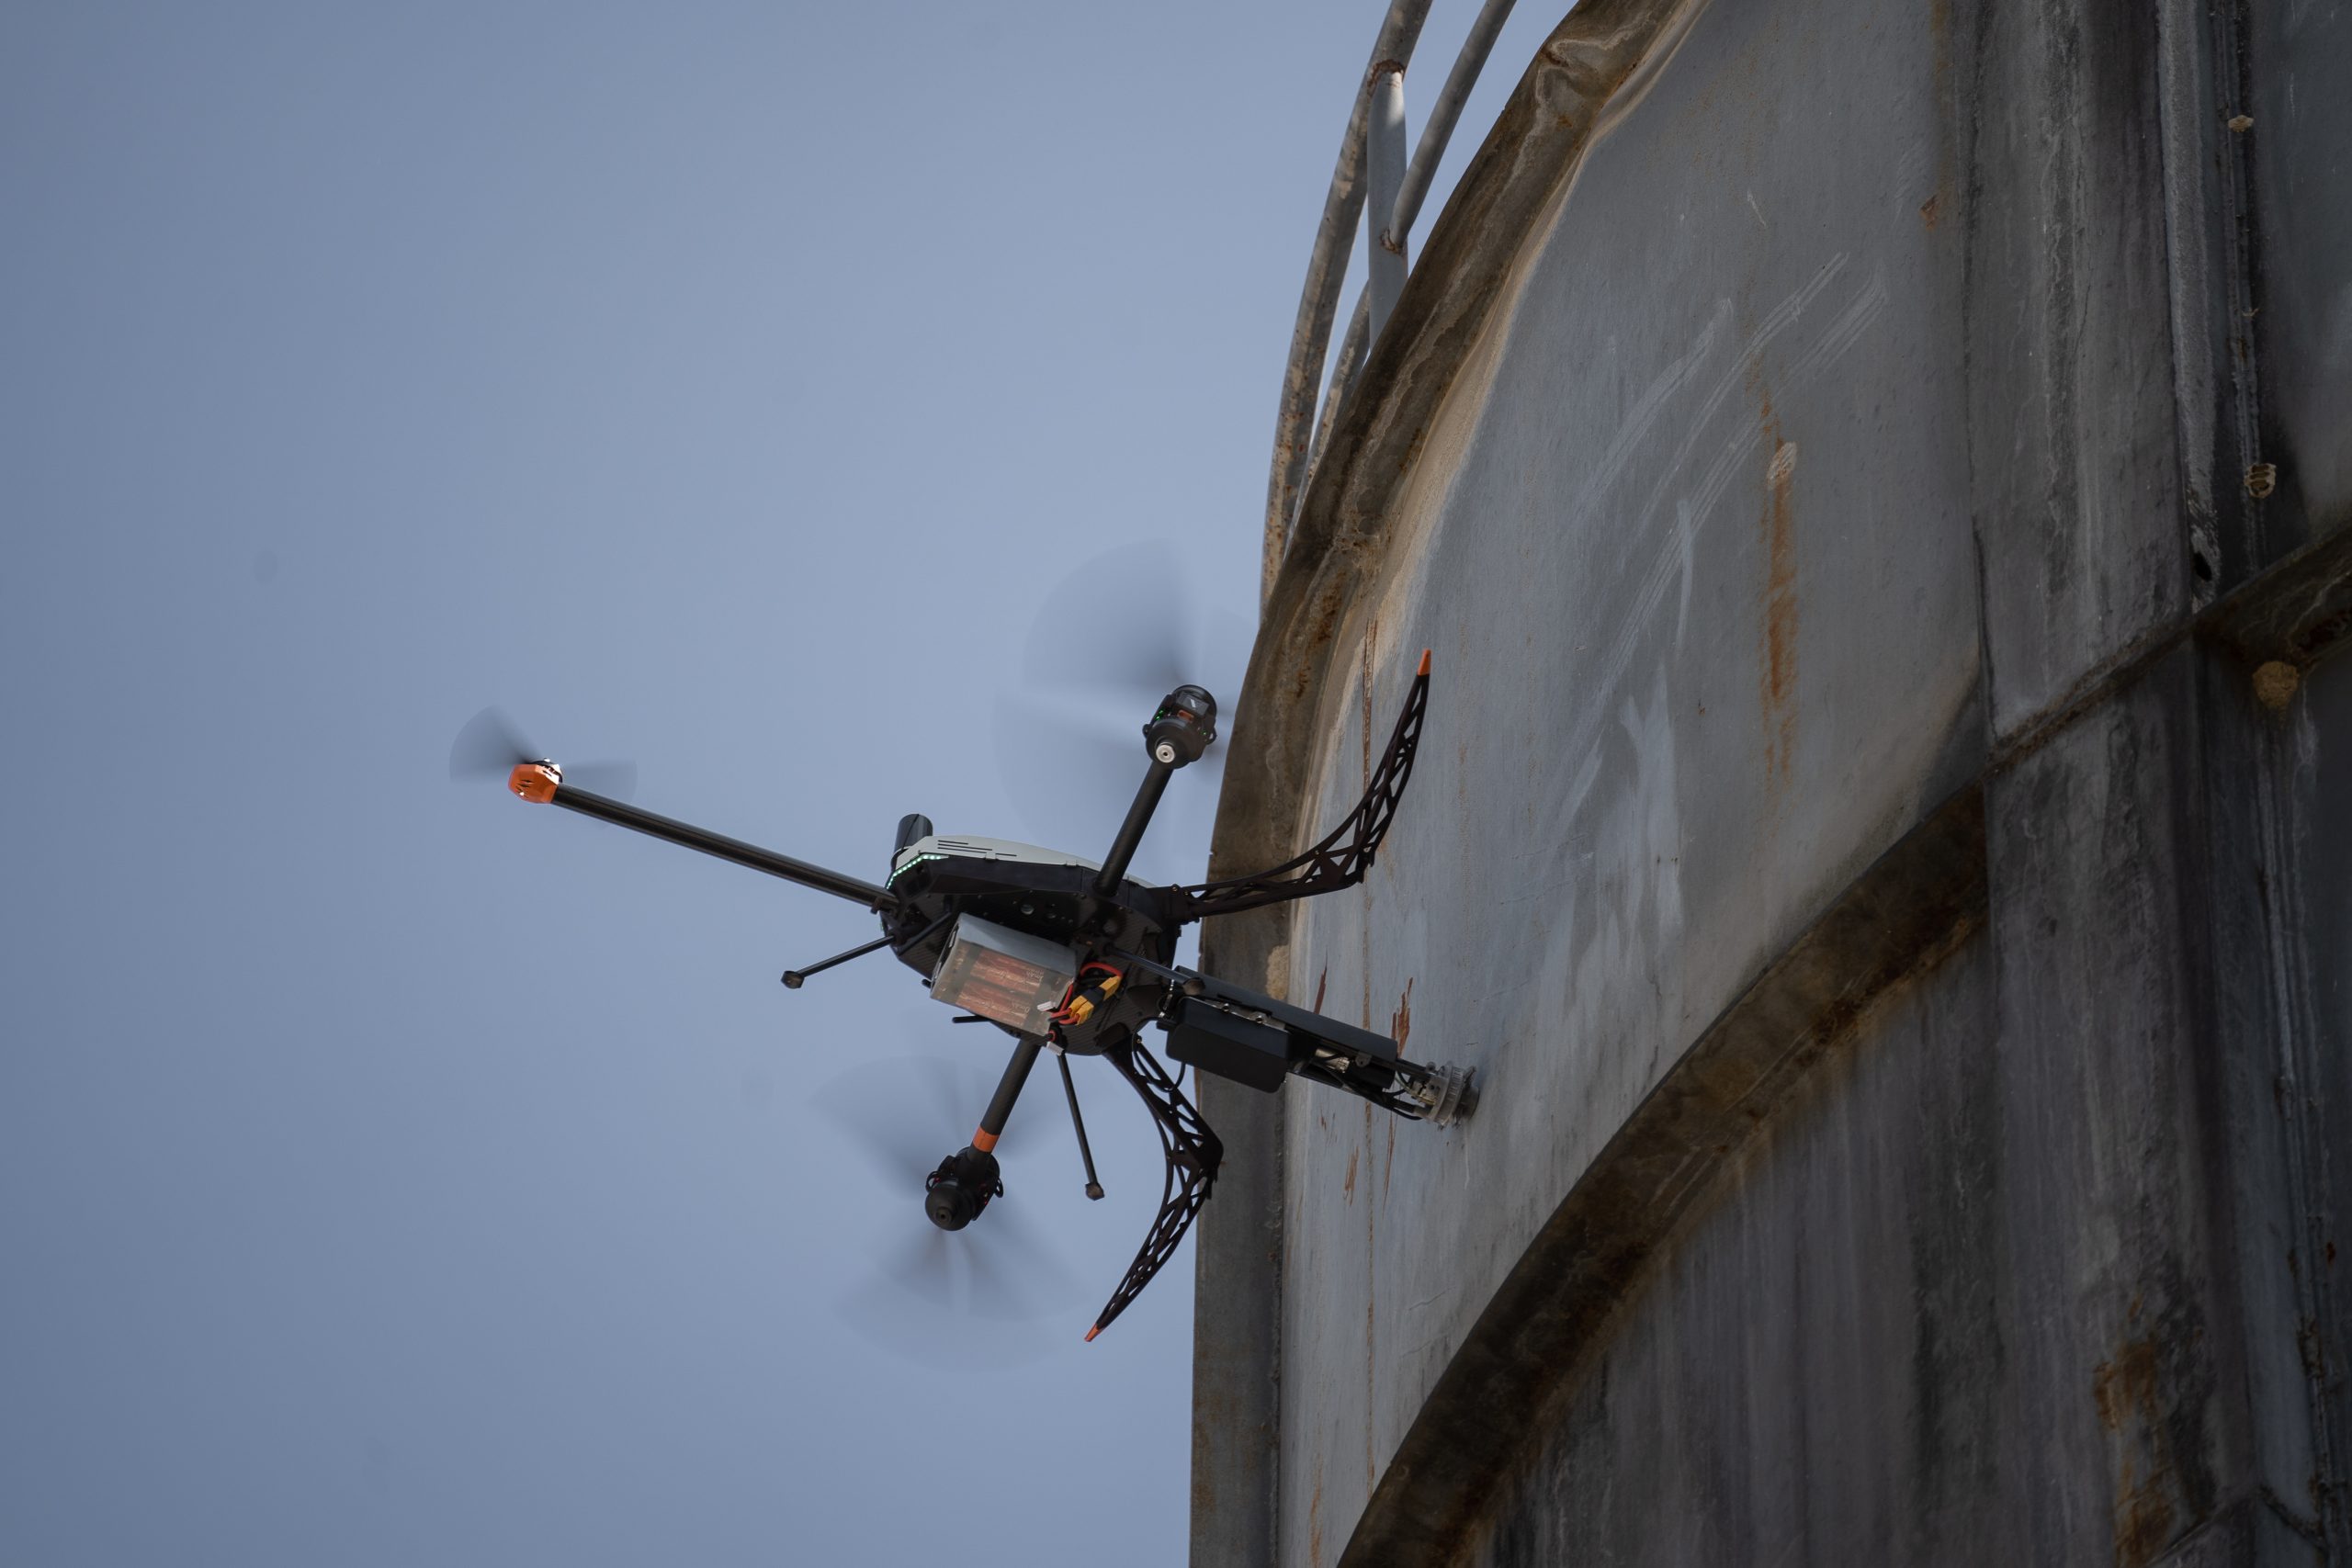 Voliro: Contact-based inspection drone for NDT and wind turbine LPS